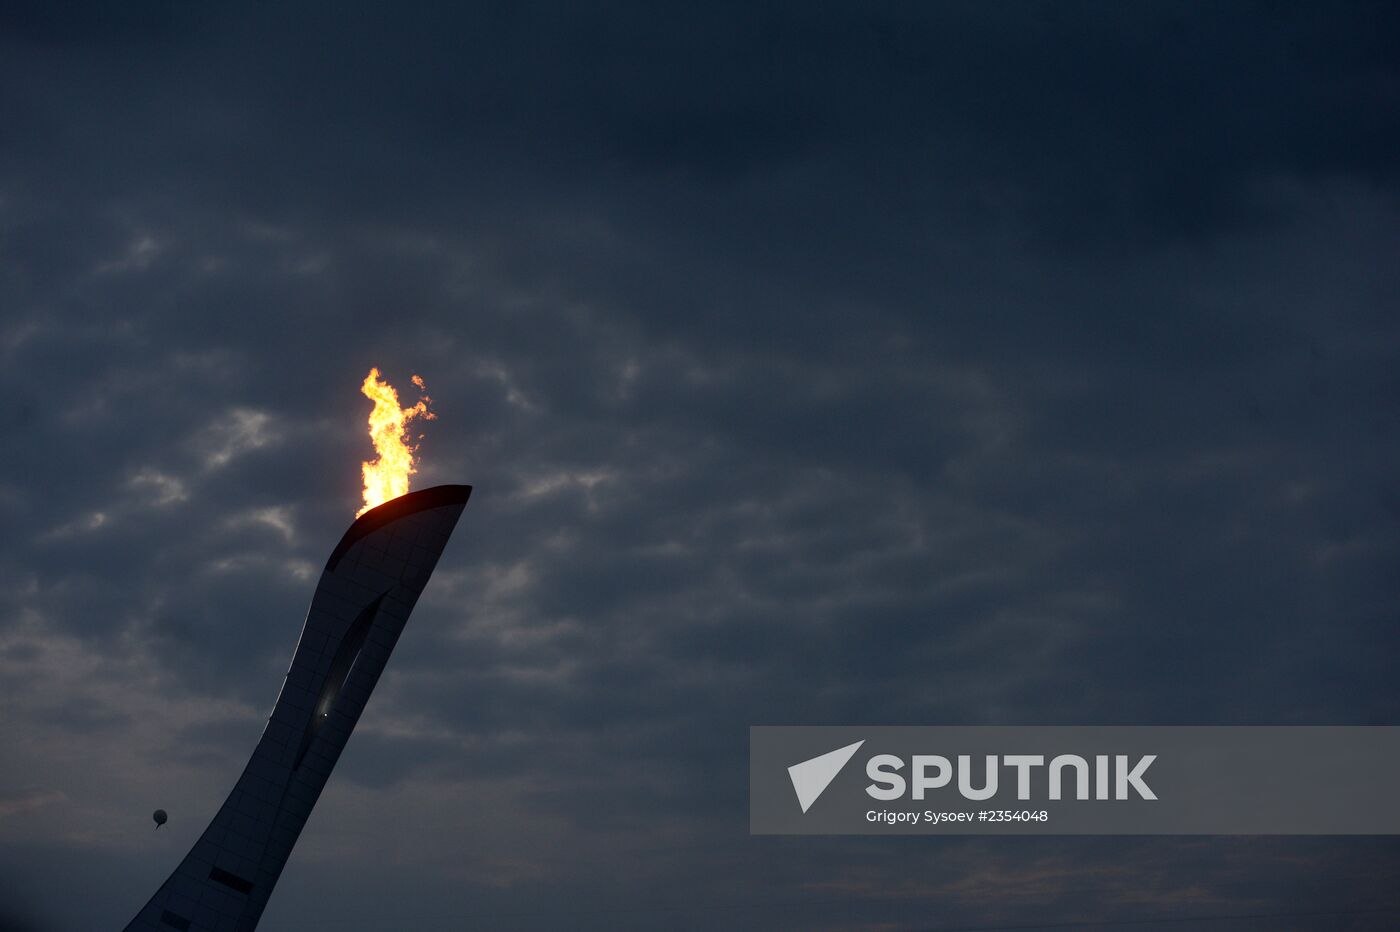 Testing the Olympic flame bowl in Sochi